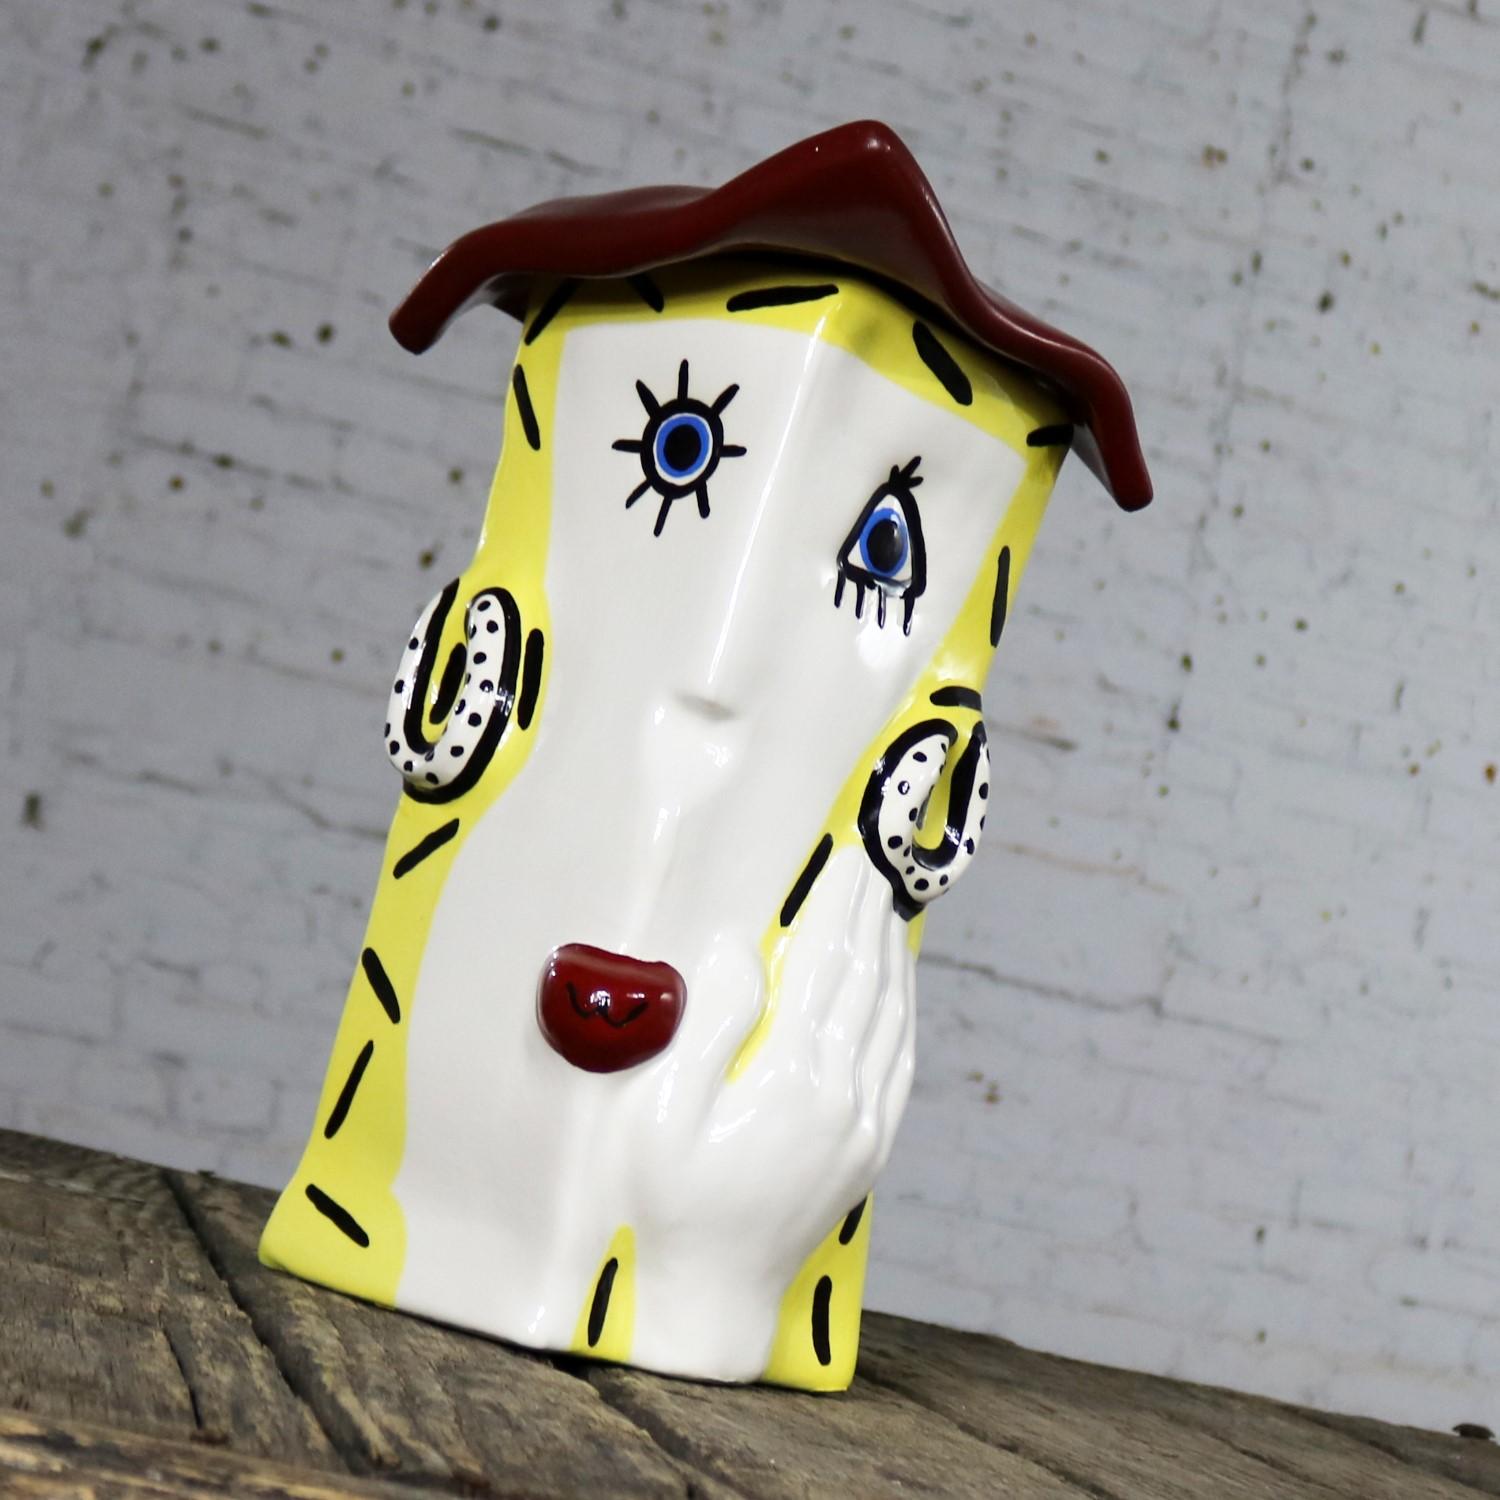 Fun and funky ceramic cookie jar or storage jar in the form of a lady’s head with her hand to her face wearing a red hat. It is in excellent condition with no chips, cracks, or chiggers, circa 21st century.

This unique jar just makes me smile!!!